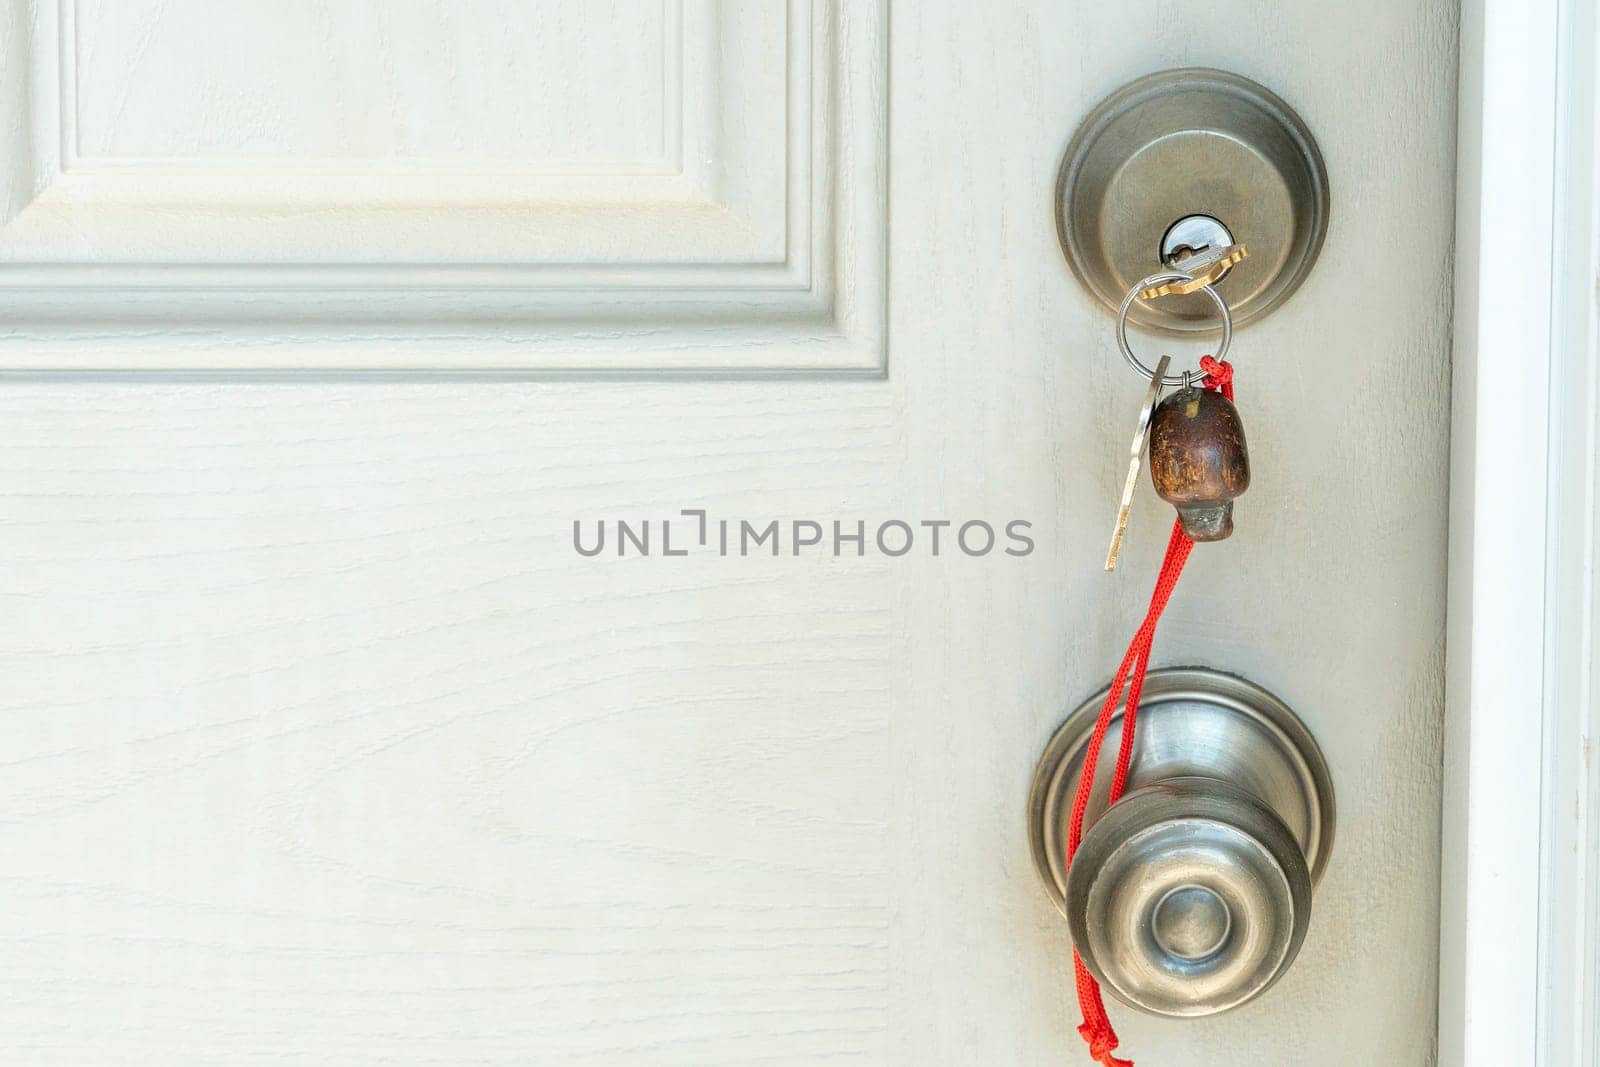 A key with a keychain on a red rope is inserted into the door lock.